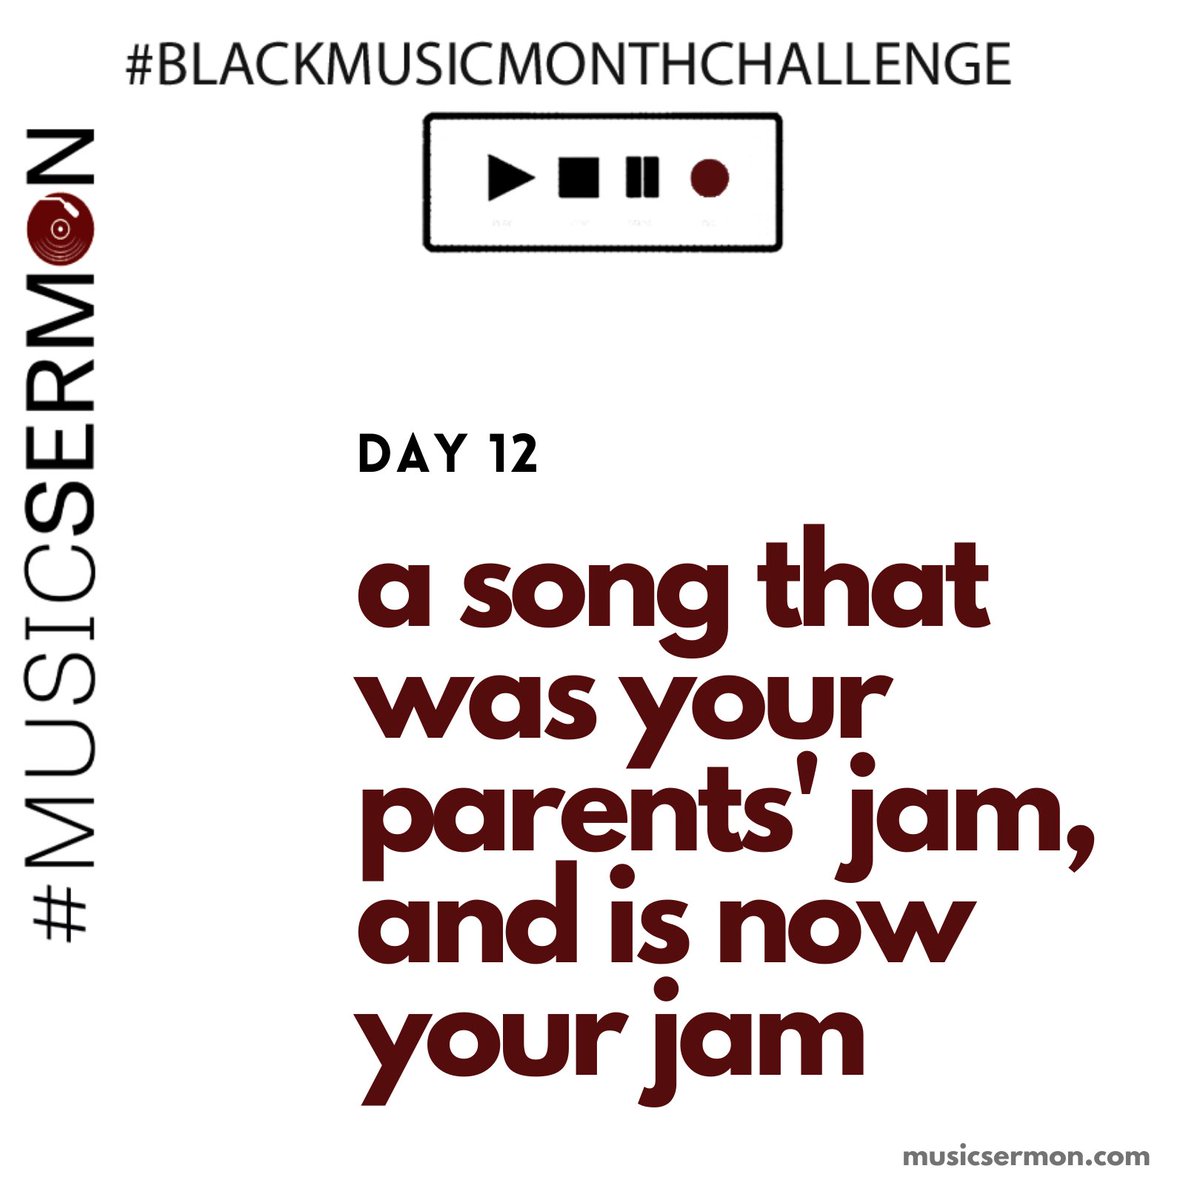 There are songs we grew up hearing our parents play so much, that as adults we realized we’d taken possession of them as personal jams. For Day 12 of the  #BlackMusicMonthChallenge, in honor of missed Summer family cookouts, name a song that was your parents’ jam, and is now yours